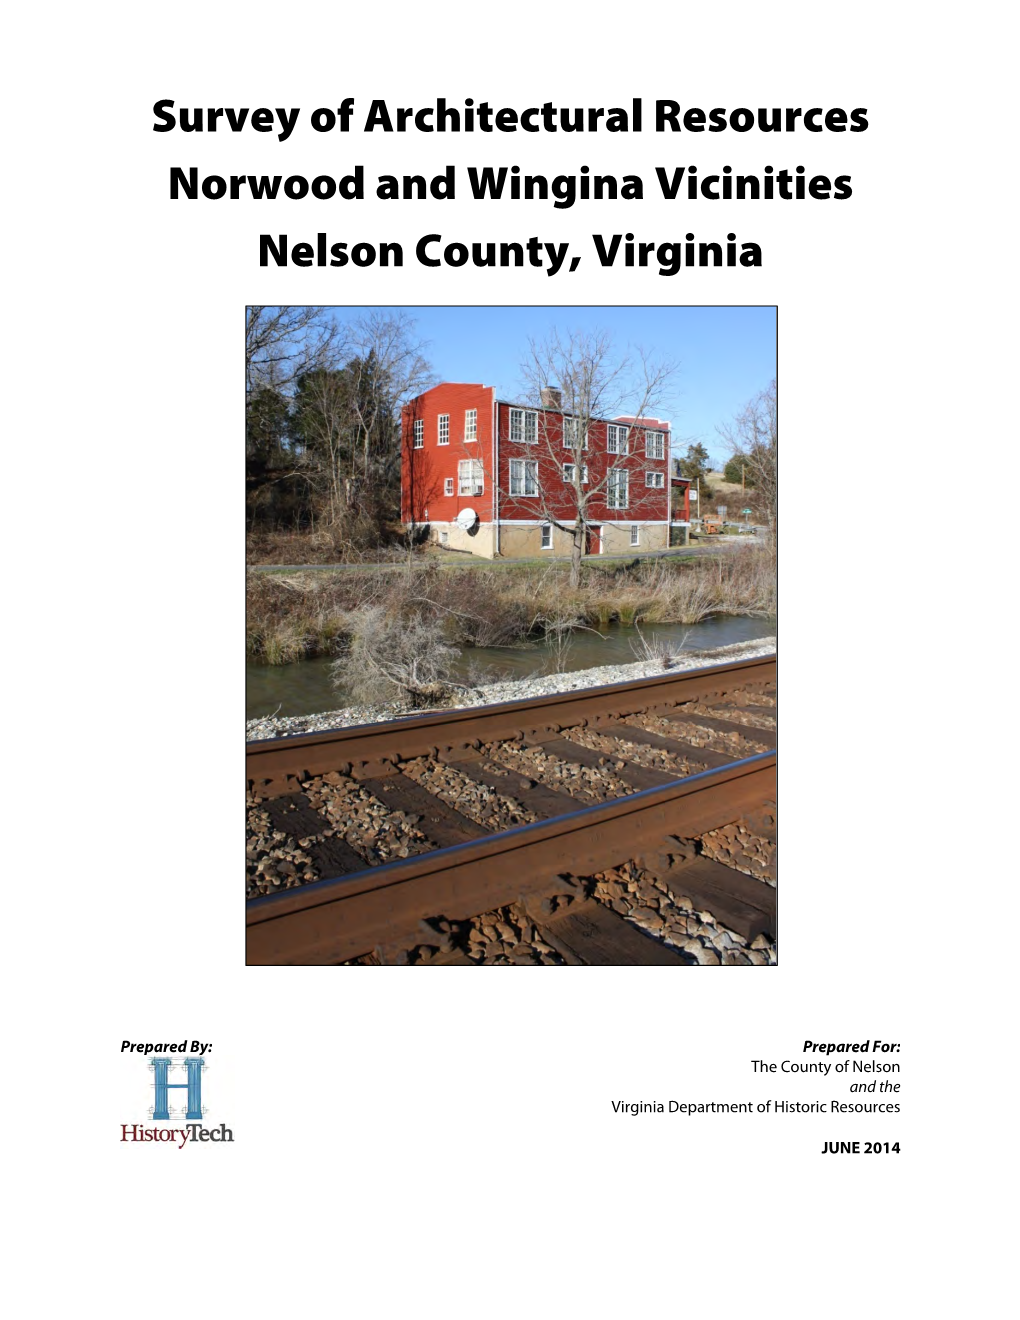 Survey of Architectural Resources in the Norwood and Wingina Vicinities of Nelson County, Virginia